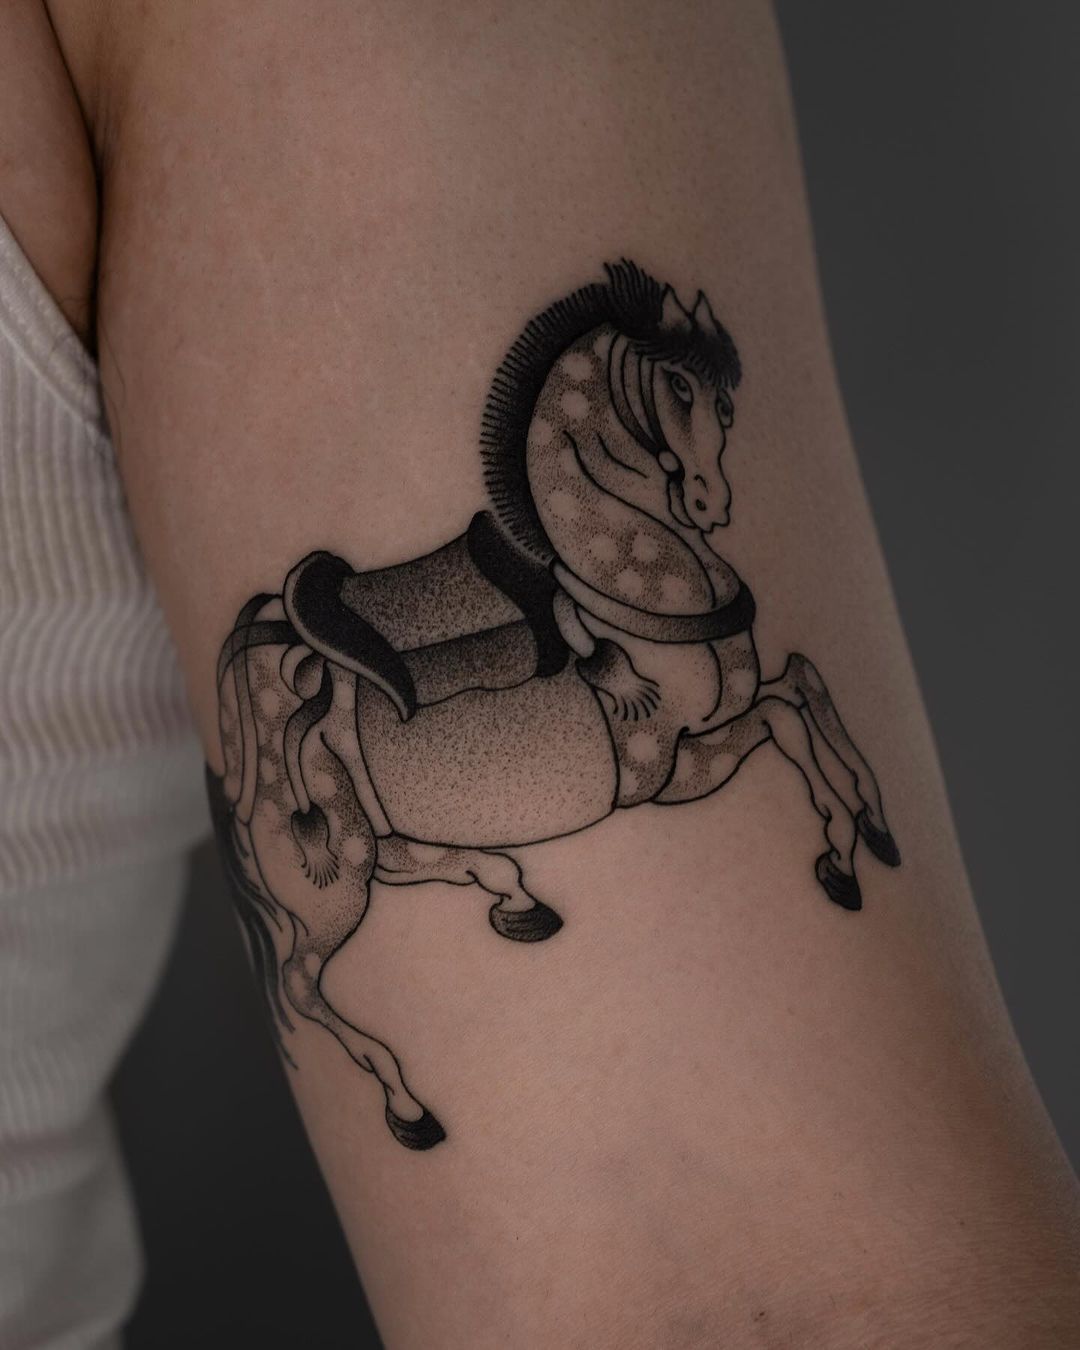 MorningStar Tattoos - Spirit Stallion of Cimarron from 4 years ago done by  @jairotattoos for any inquiries about appointments please visit our website  MorningStartattoos.com or email us at info@morningstartattoos.co.uk thanks  for watching!!